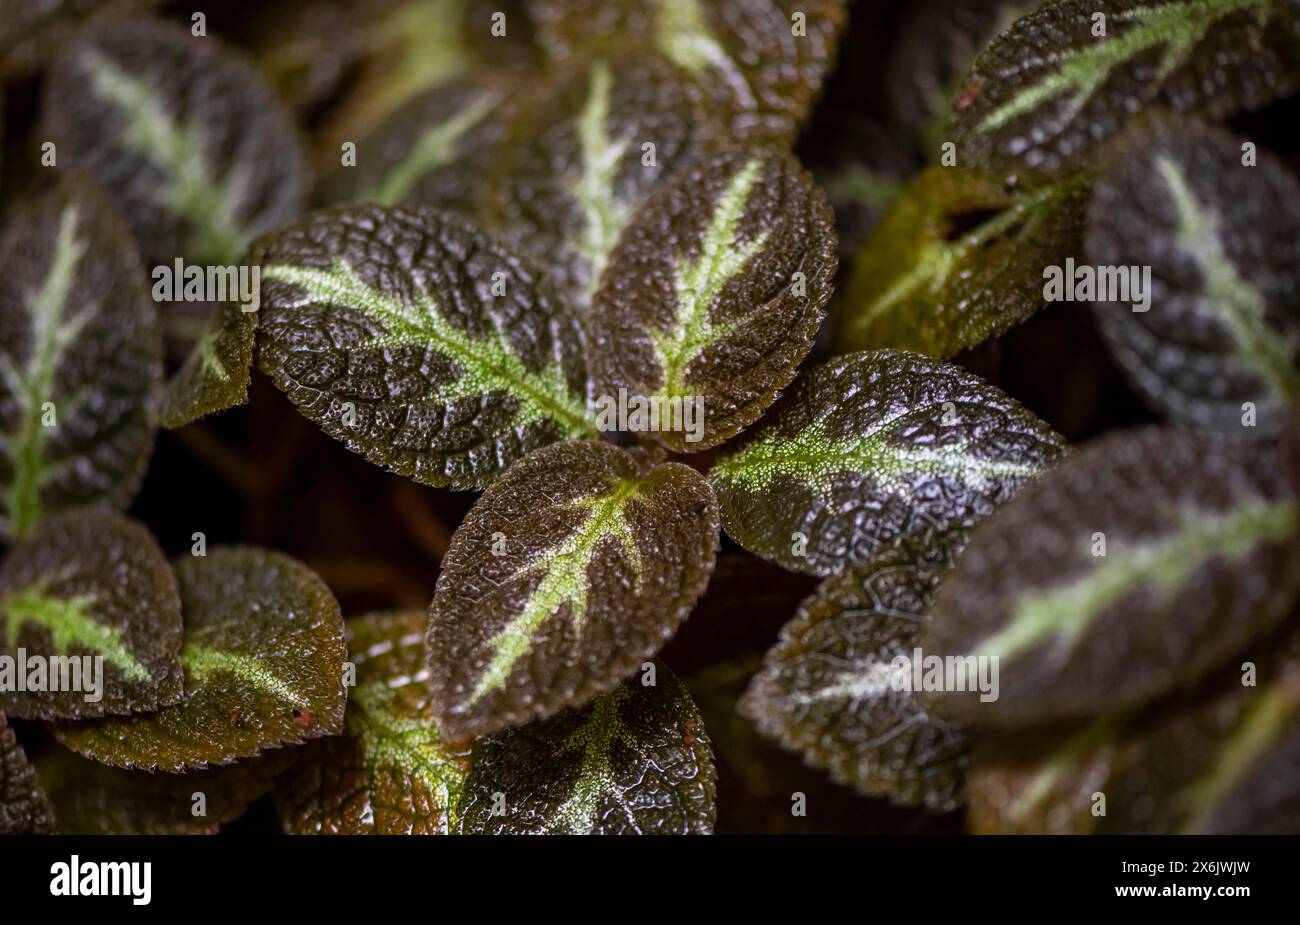 Shade tube (Episcia), leaves with light green veins, Tortuguero National Park, Costa Rica Stock Photo